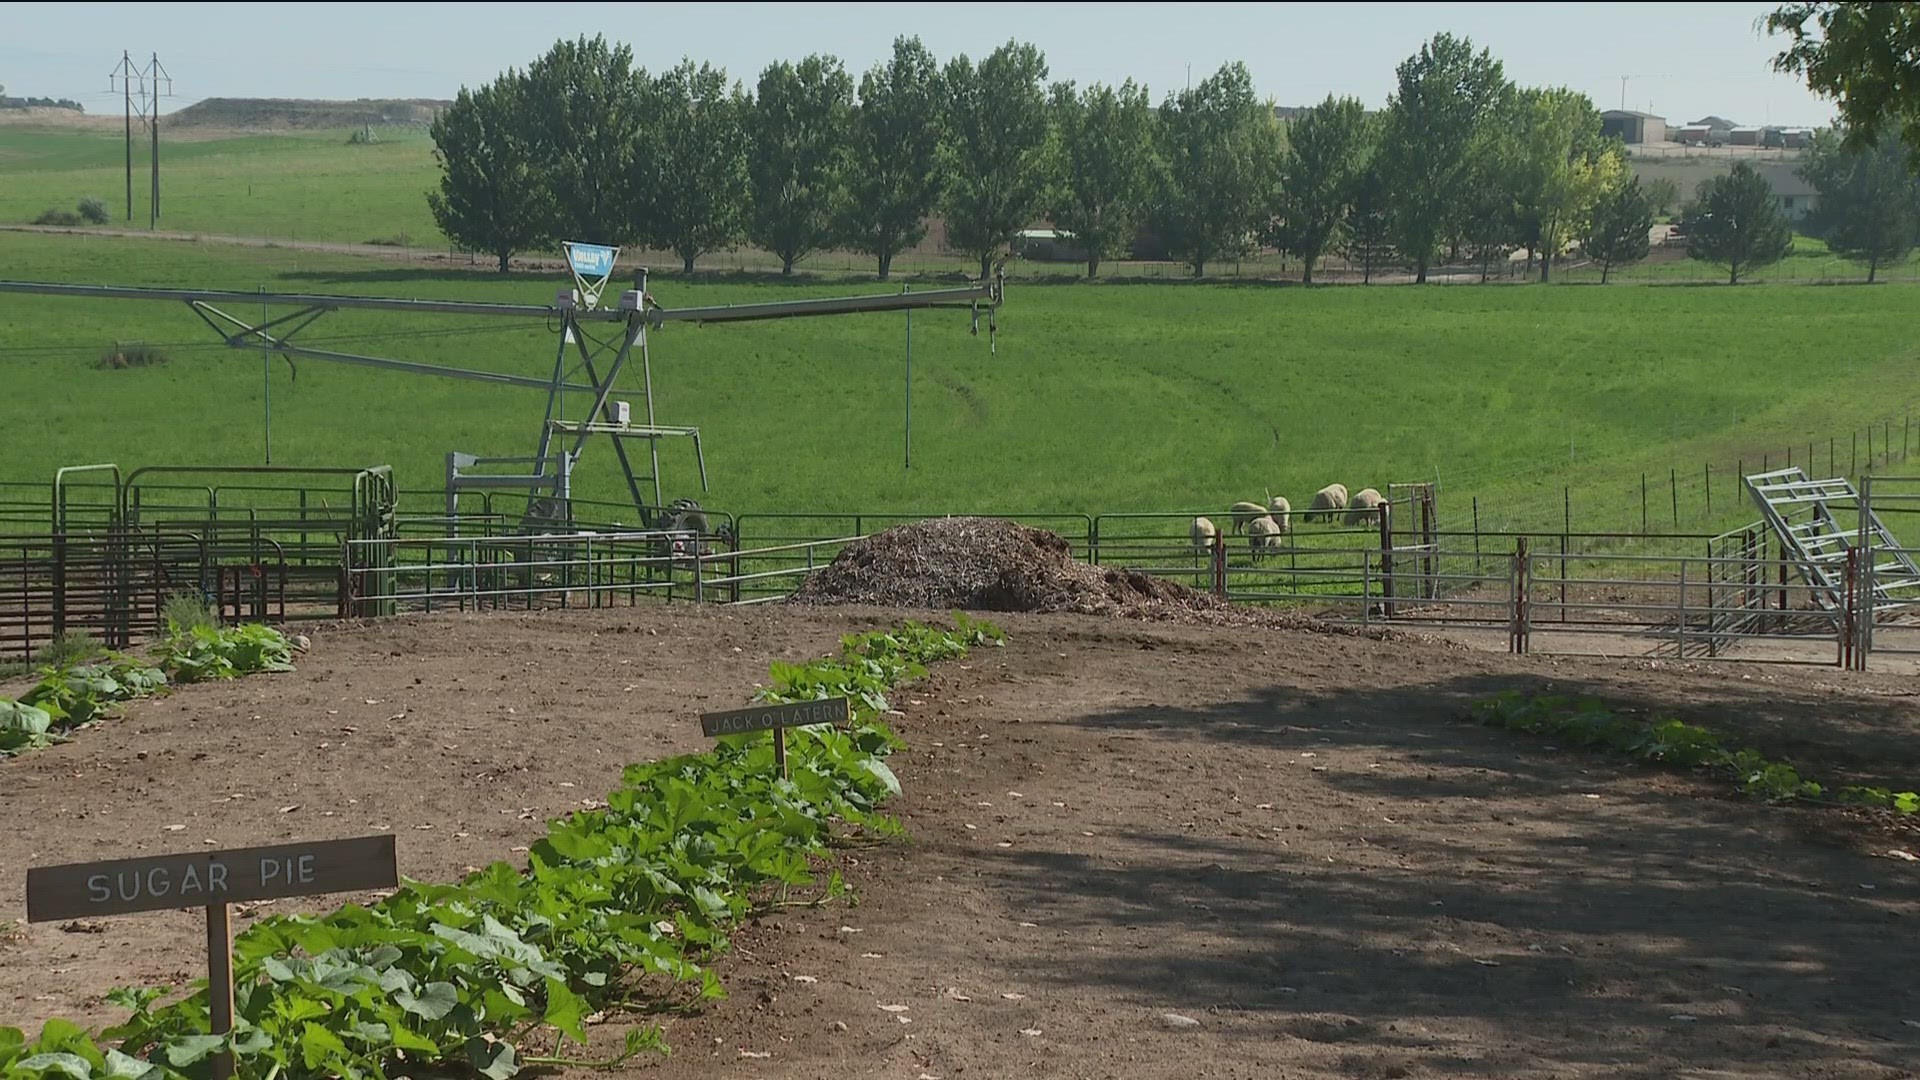 This Nampa farm allows people passing through to stay overnight, experience the land and get to know their animals.